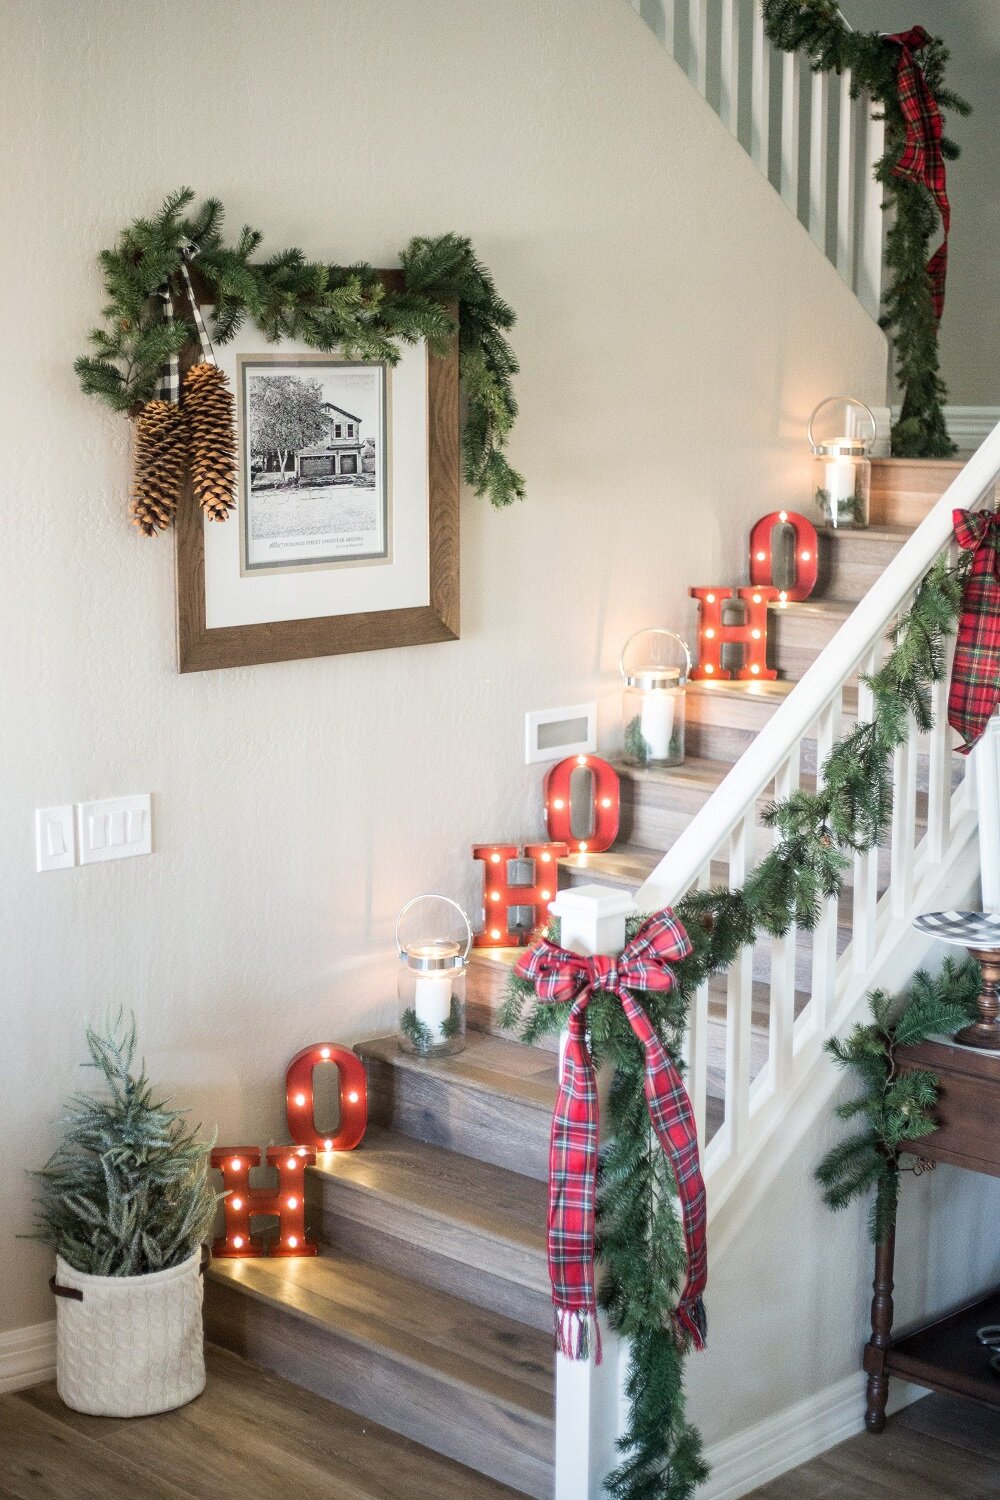 t3-2-1 Awesome Christmas staircase decorating ideas you should absolutely try